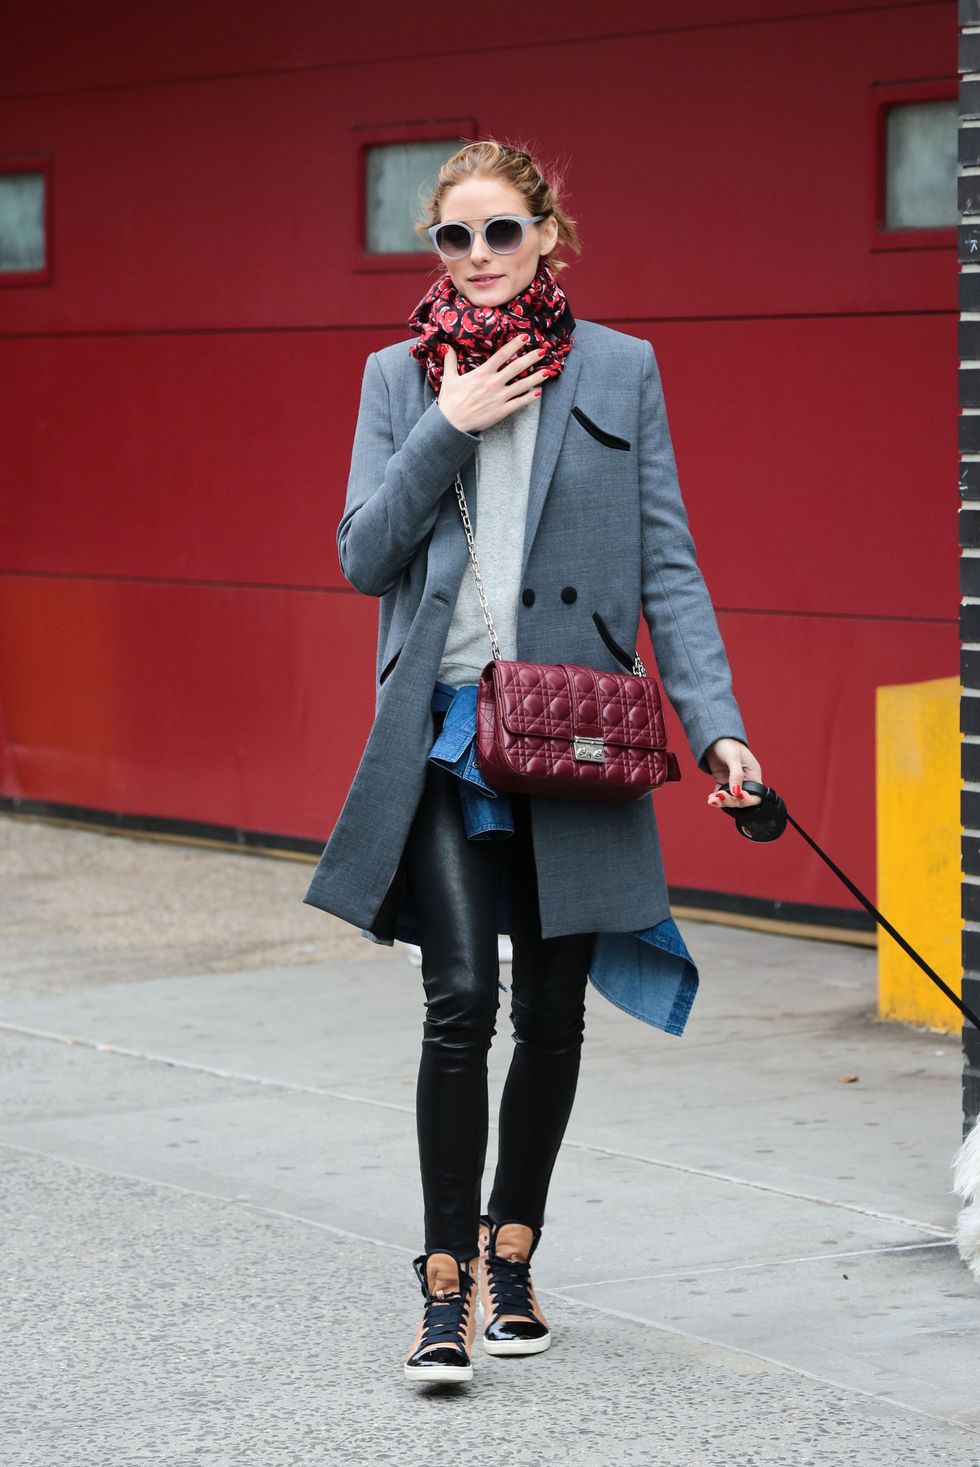 NEW YORK, NY - APRIL 26: Olivia Palermo is seen in New York City on April 26, 2015 in New York City.  (Photo by Ignat/Bauer-Griffin/GC Images)